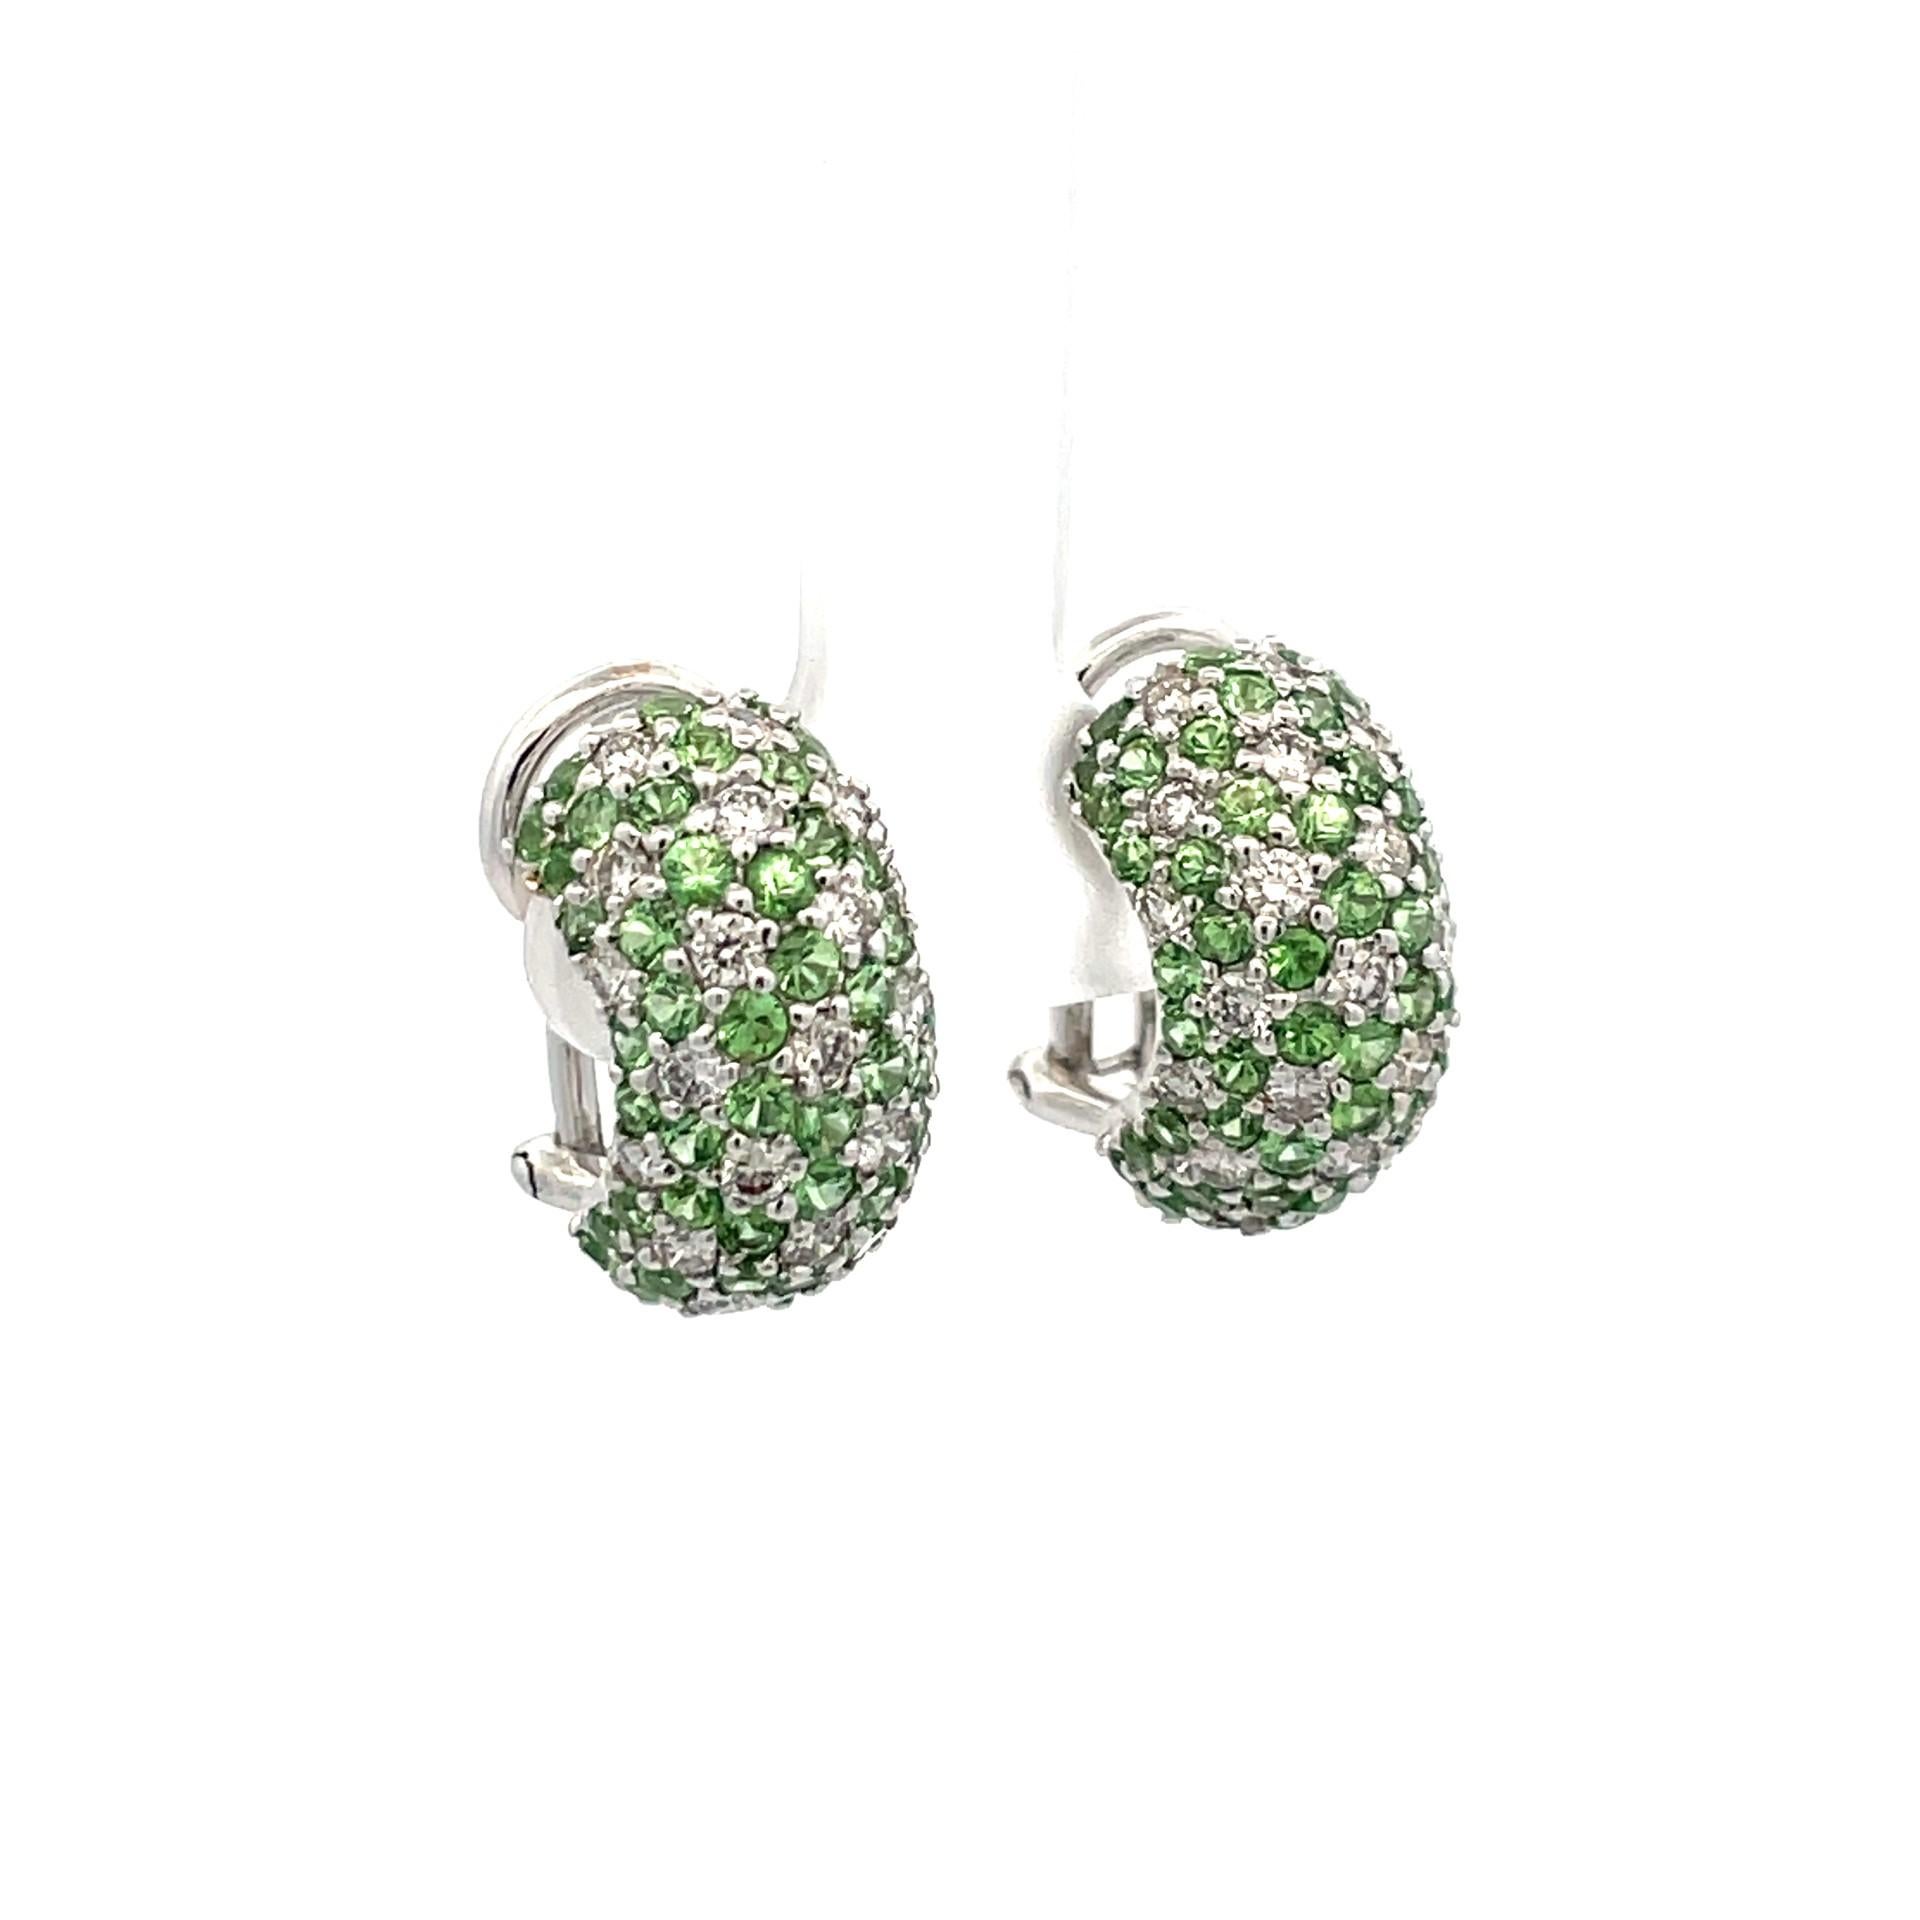 A pair of pave wide huggies set with natural green tsavorite and brilliant cut diamonds in 18kt white gold with a straight post and omega clip system. 

102 natural green tsavorites 4.00ct total weight

44 brilliant cut diamonds 1.29ct total weight,